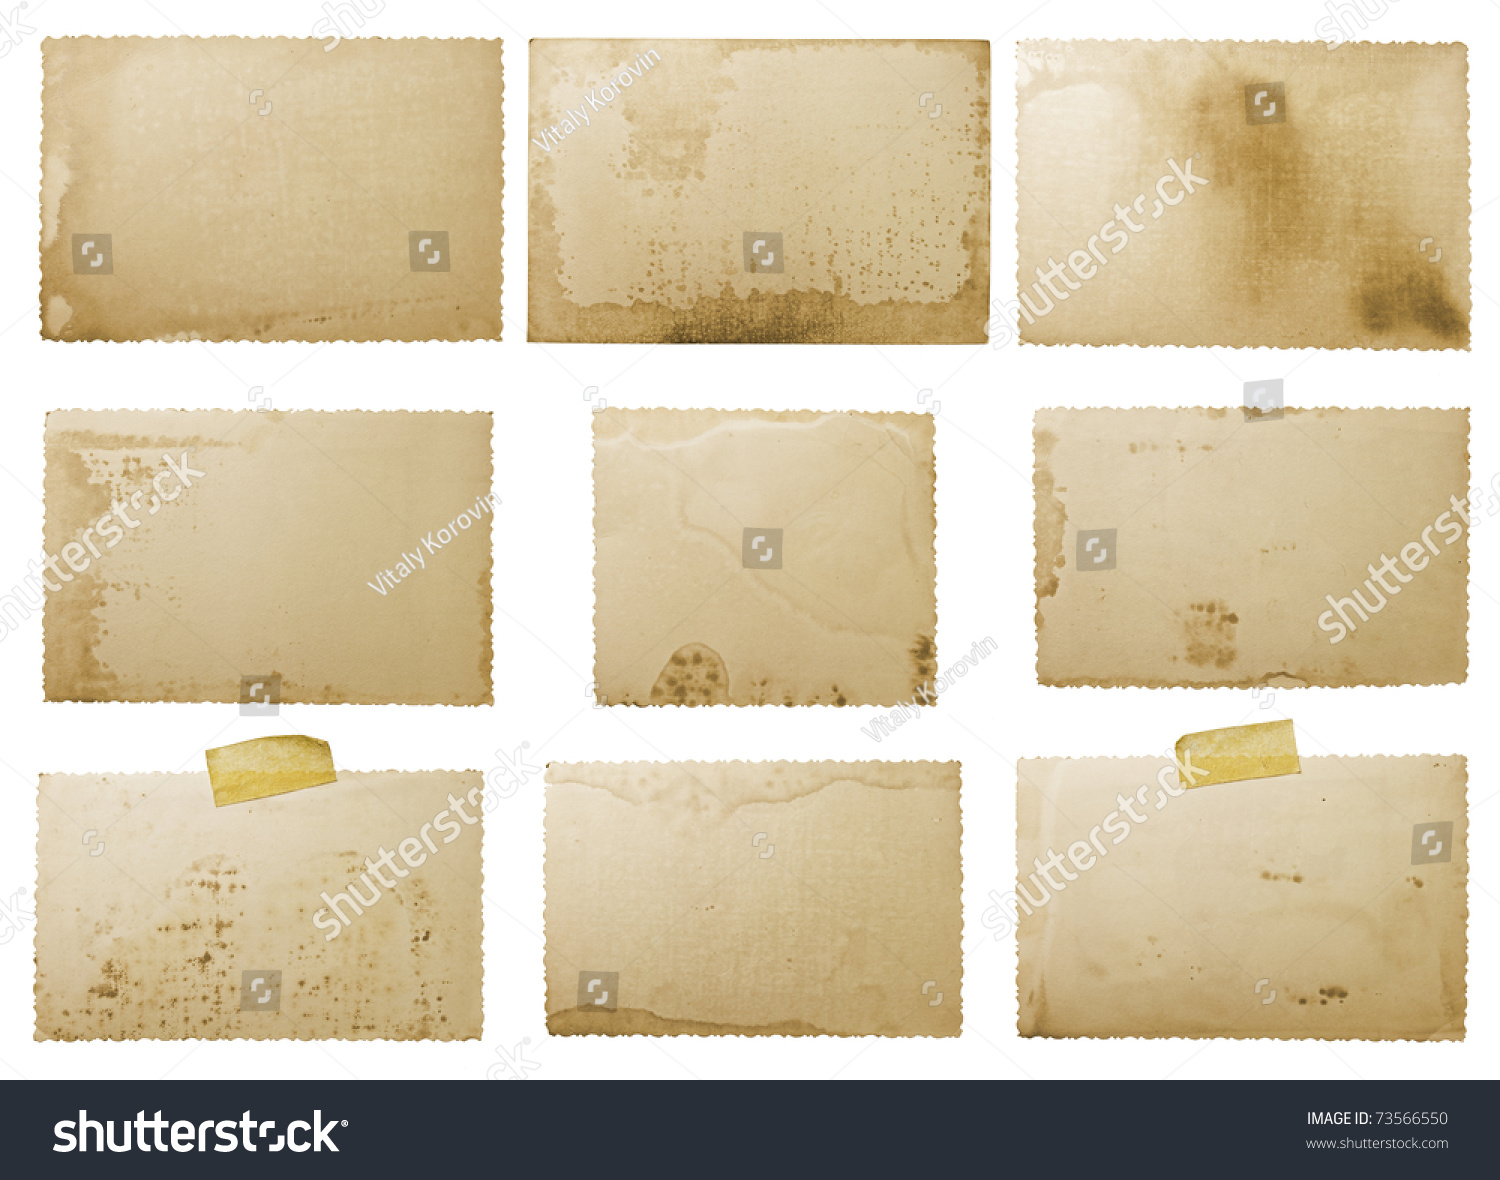 old photo paper texture isolated on white background #73566550